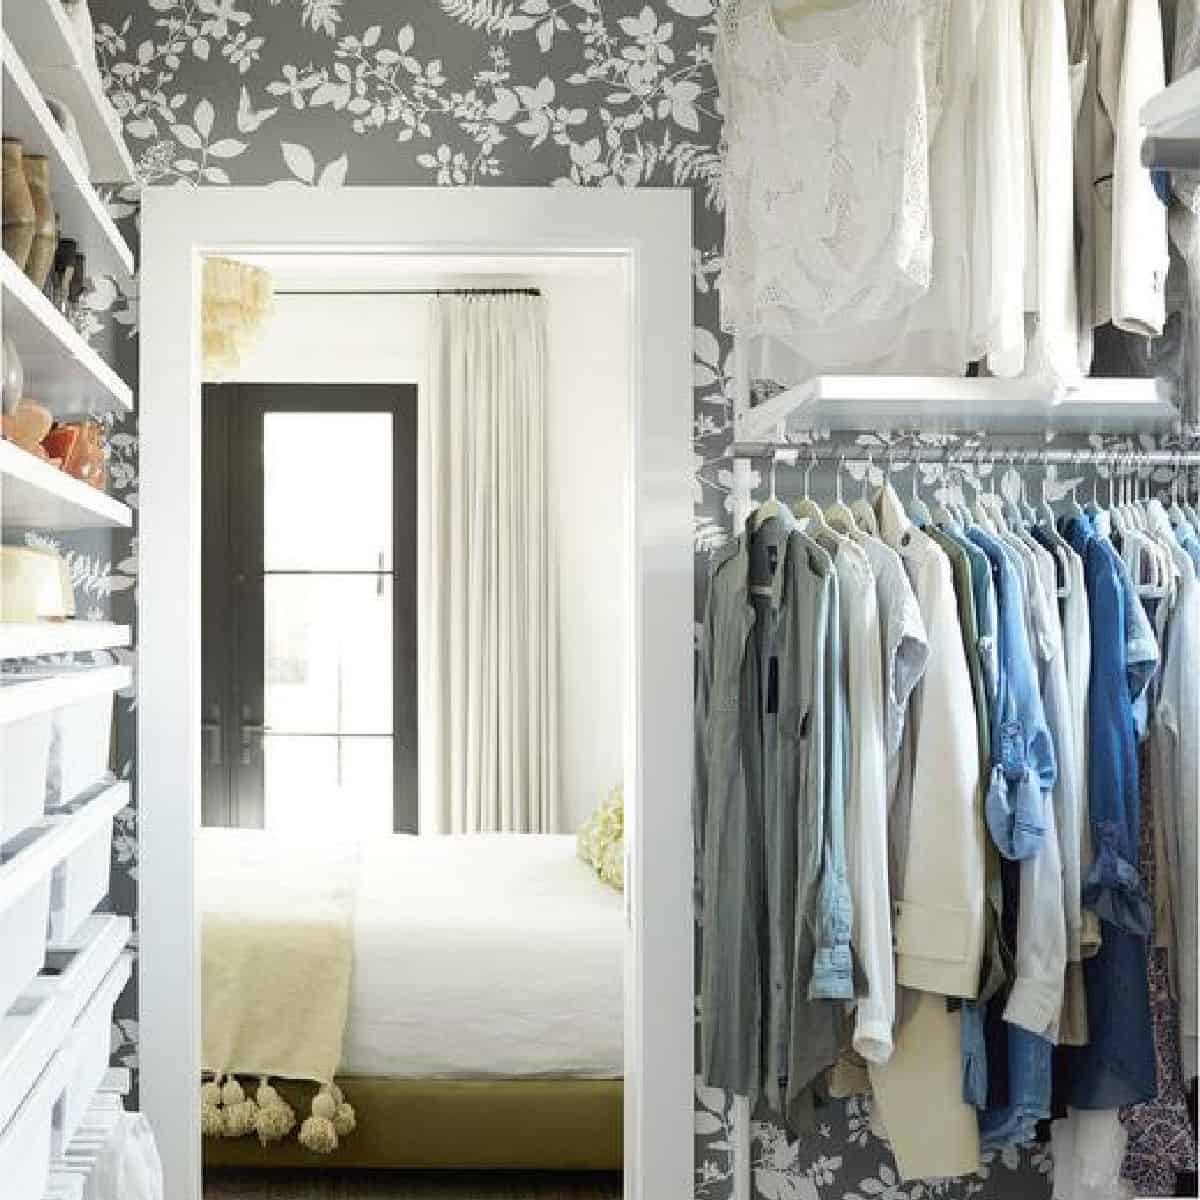 Wallpaper in a Closet – Inspiration and Ideas